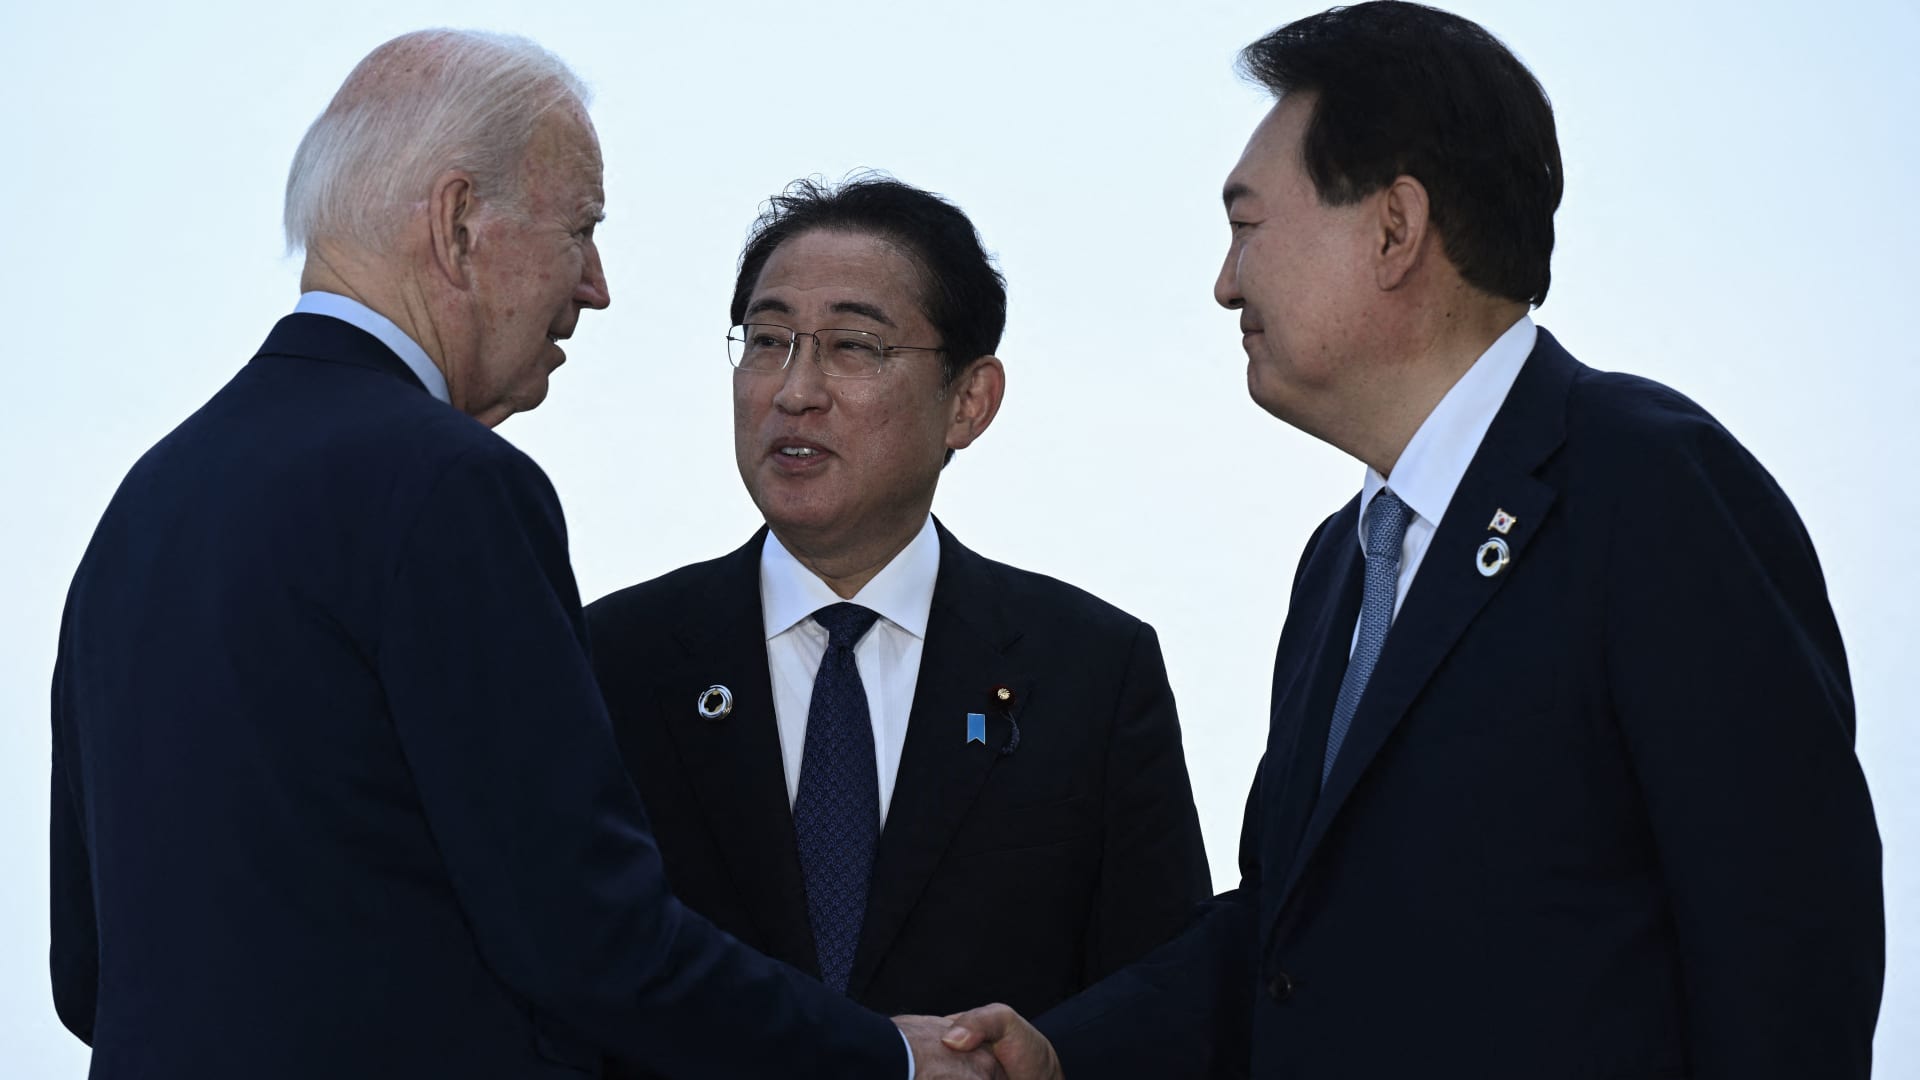 Biden looks to solidify key ties with Japan and South Korea at Camp David meeting